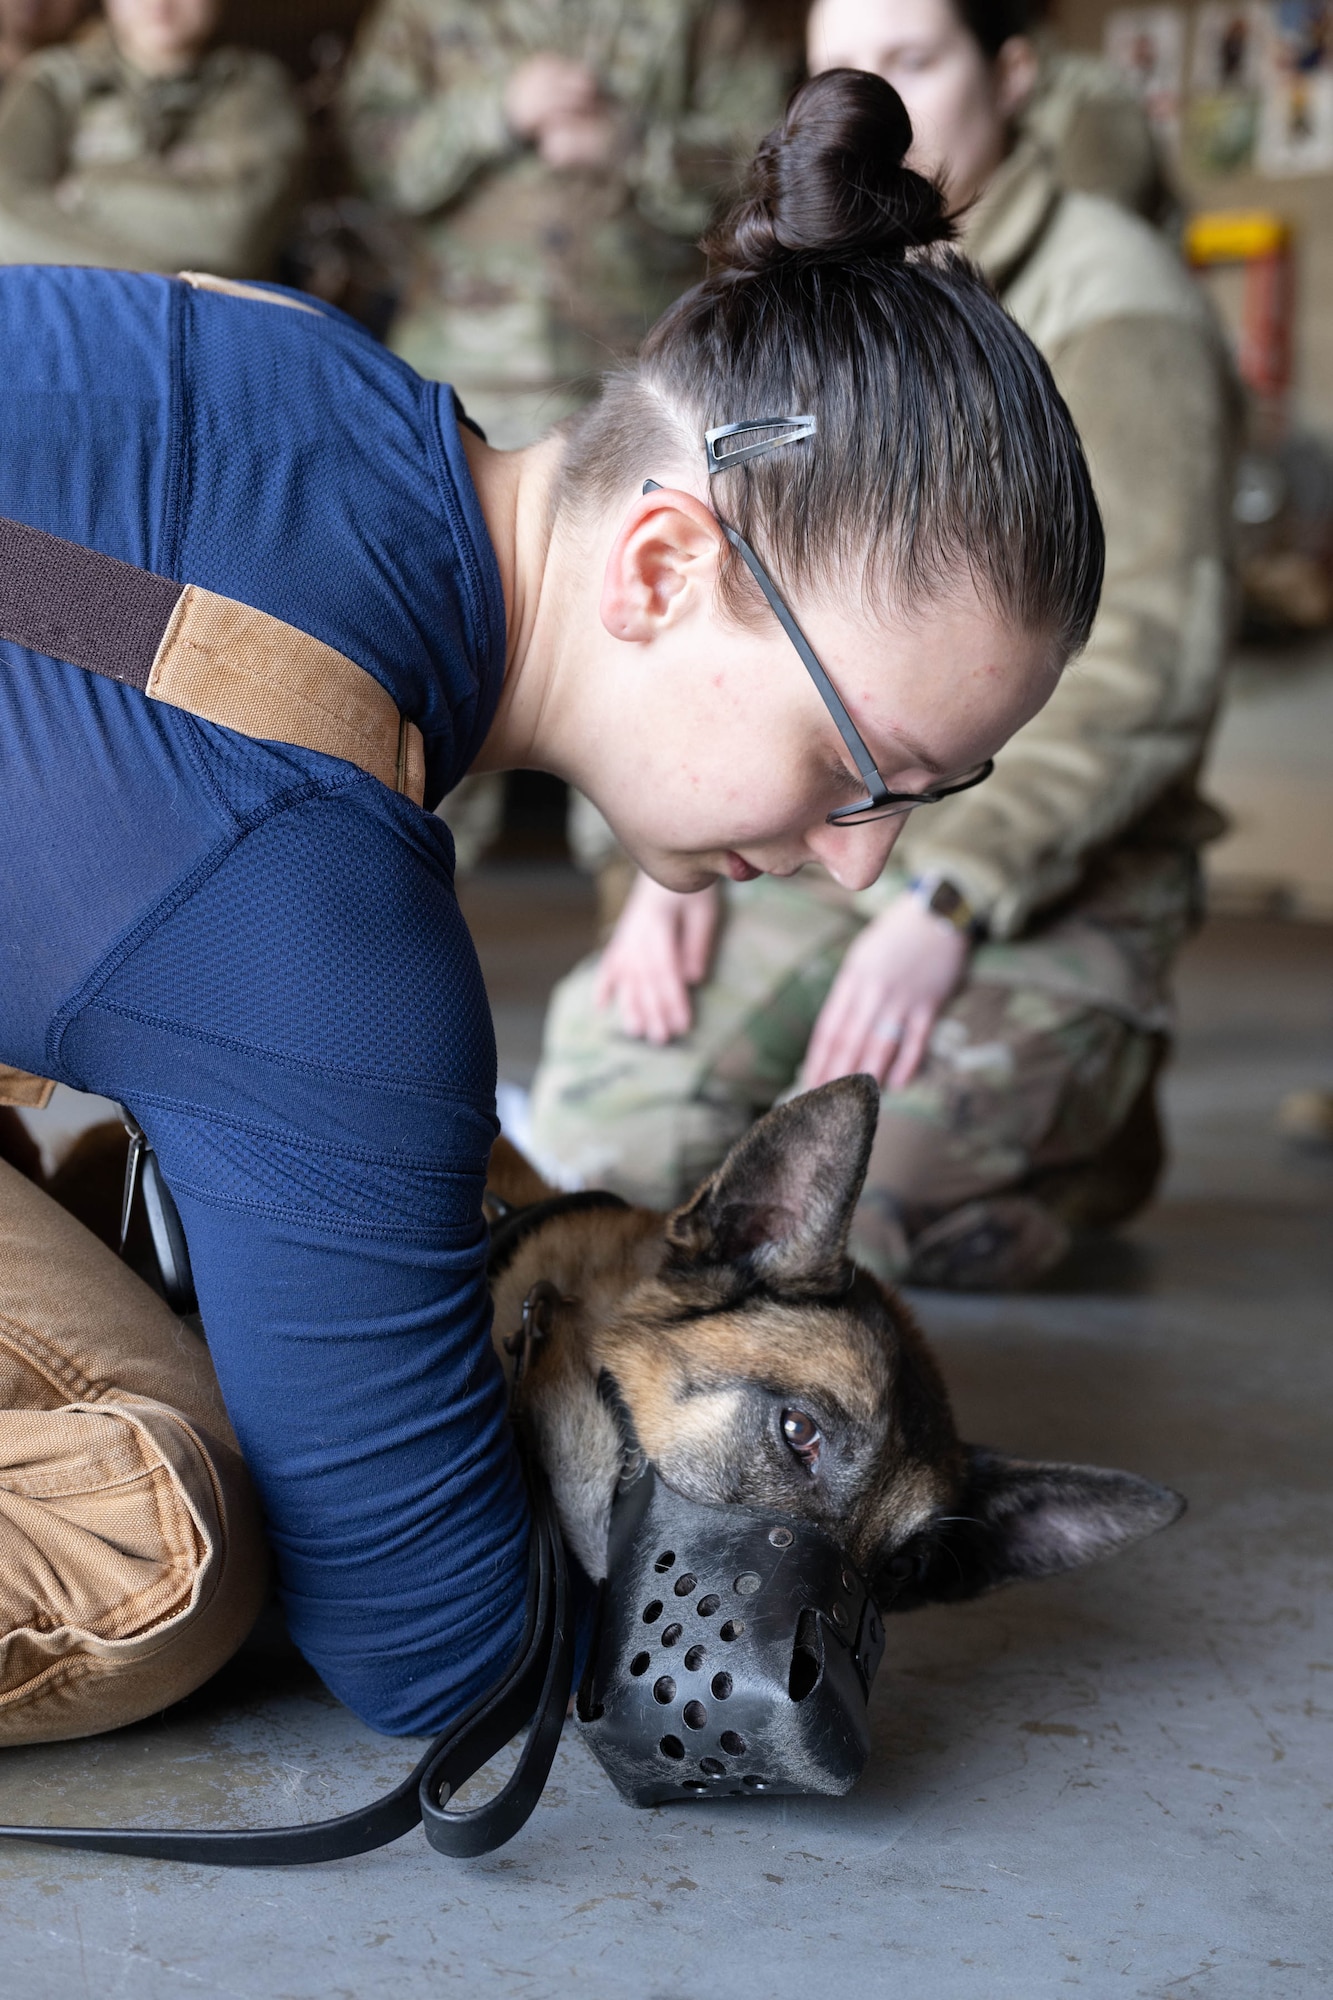 U.S. Air Force Senior Airman Courtney Burns, 436th Security Forces Squadron military working dog handler, demonstrates proper restraining techniques on MWD Zorro during a training session at Dover Air Force Base, Delaware, Jan. 10, 2024. Members of the 436th SFS MWD section along with the Dover AFB Veterinary Treatment Facility and the 436th Medical Group Warm Zone team held a joint training session to practice the skills necessary to decontaminate MWDs and possibly save their lives in the aftermath of a nuclear, biological or chemical attack or spill. (U.S. Air Force photo by Mauricio Campino)